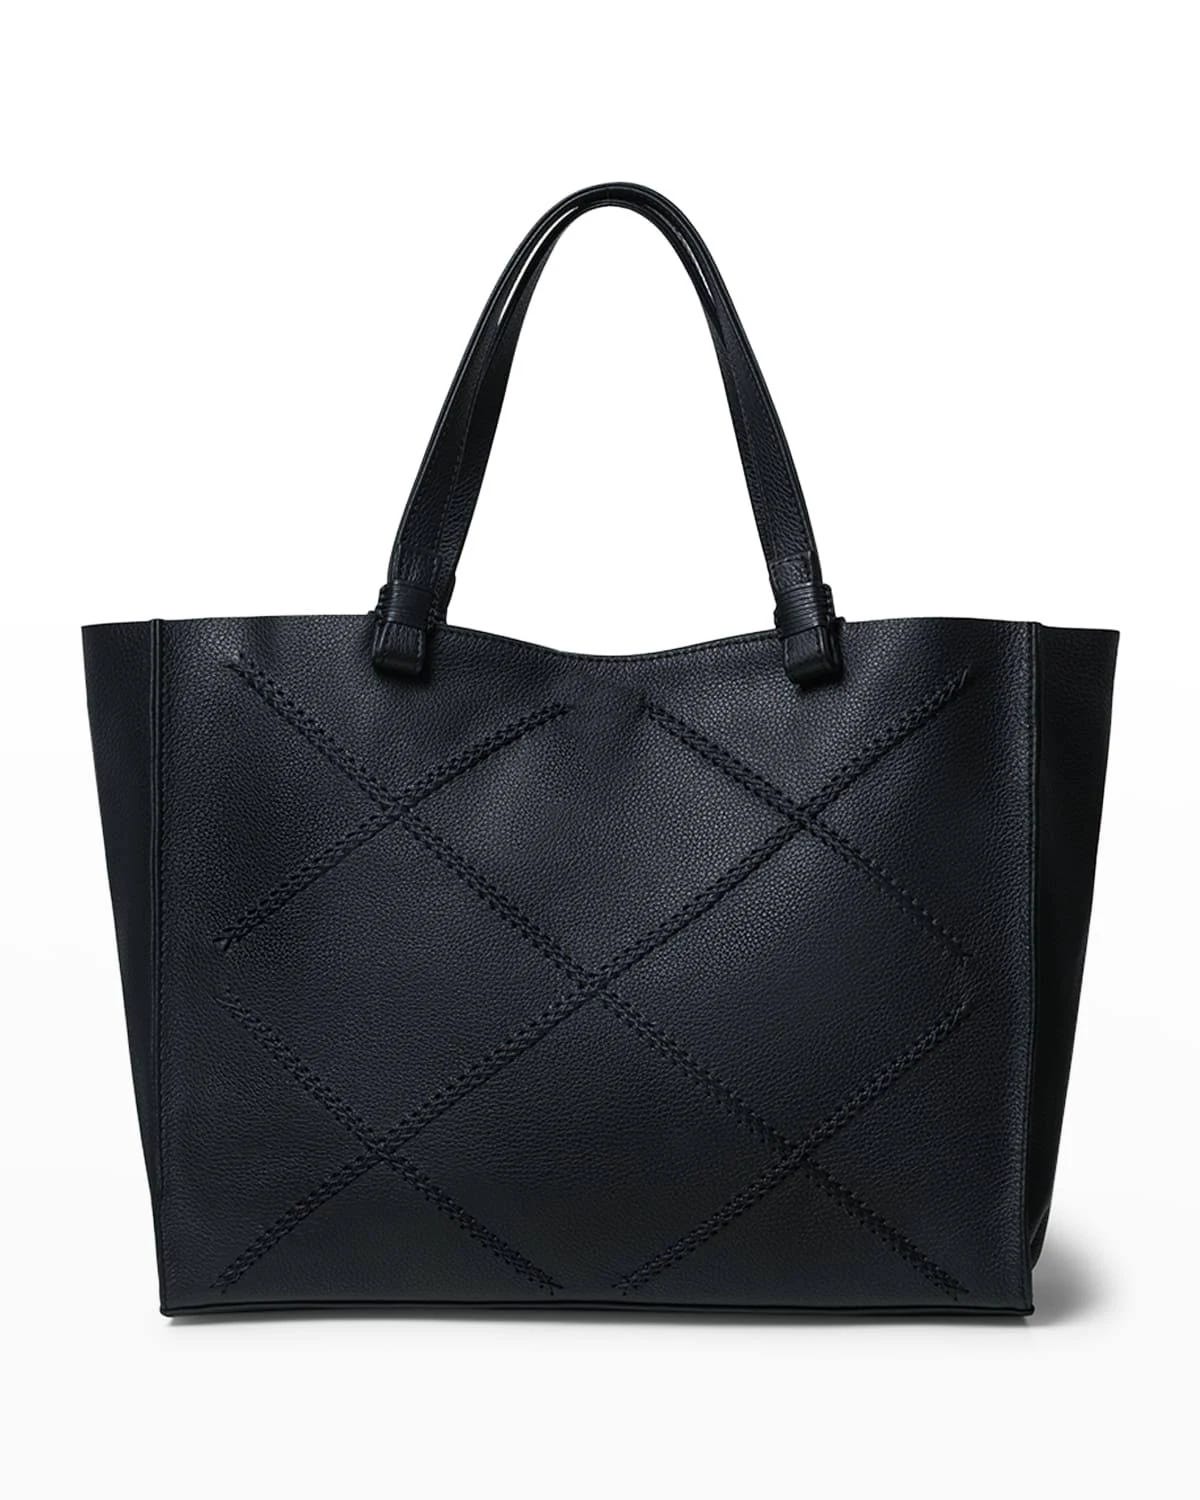 Black Leather Tote Bag with Criss-Cross Trim | Image